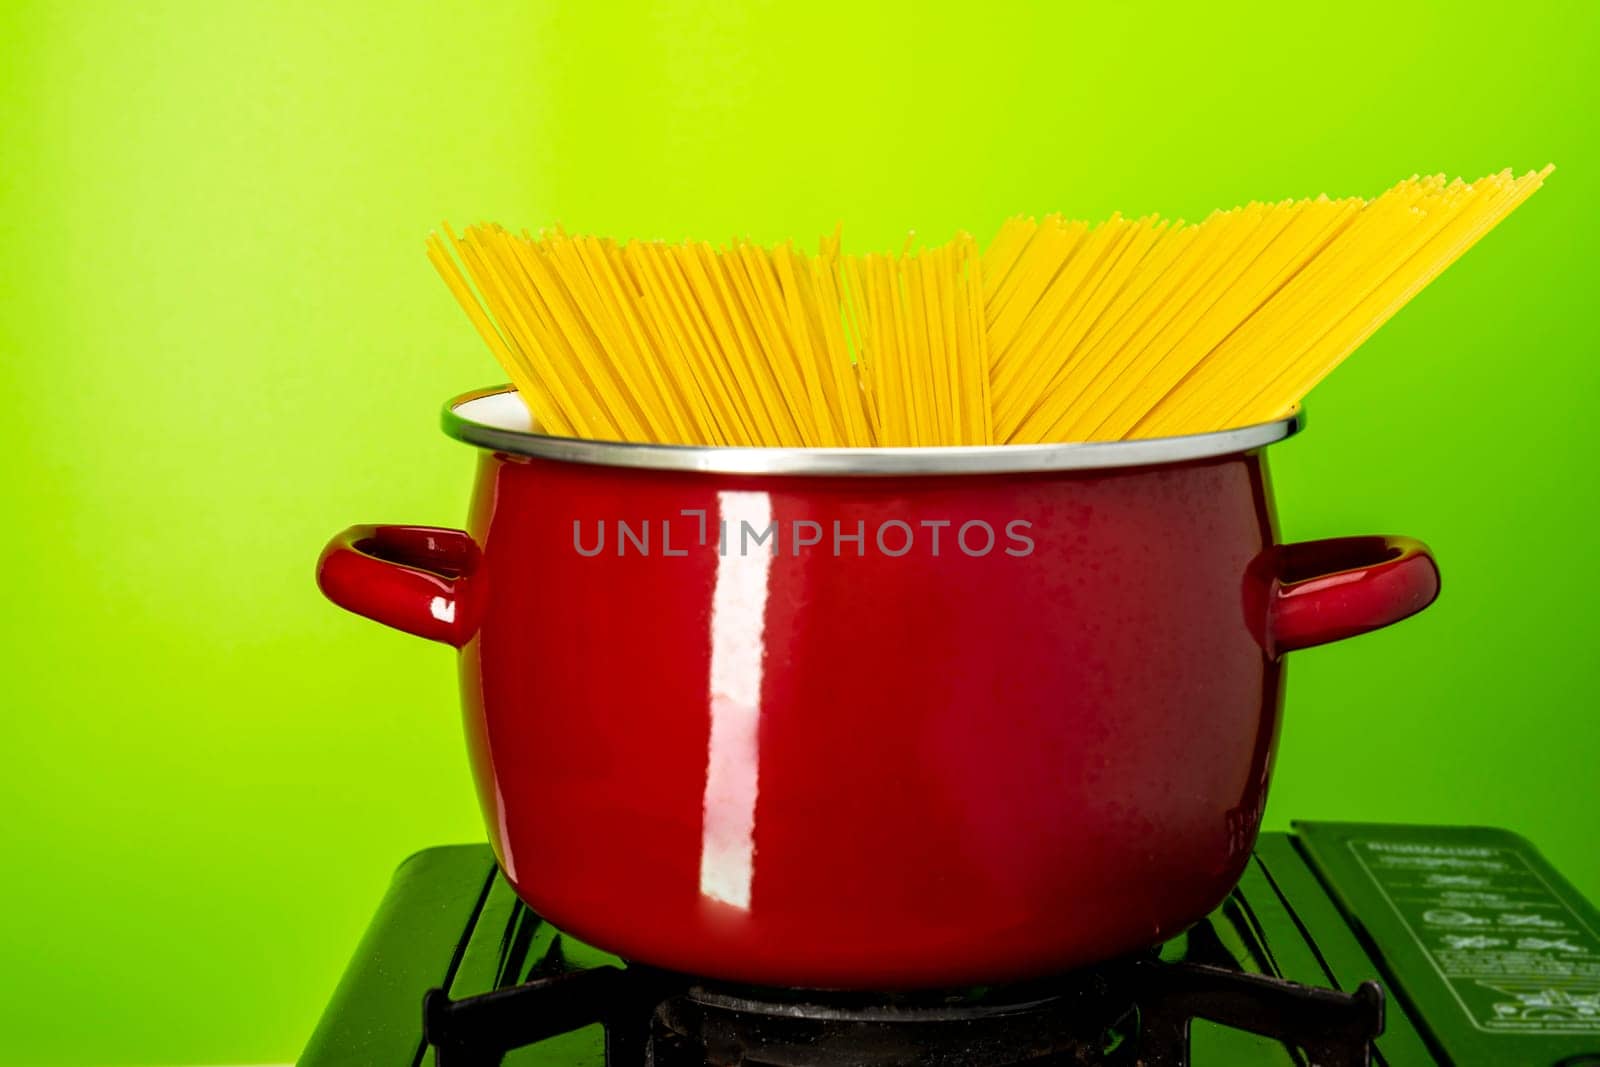 recipe. we cook ourselves. spaghetti in a saucepan. a beautiful red saucepan with spaghetti. cooking spaghetti in a saucepan on a gas stove. homemade Italian-style dinner. kitchen saucepan on a green background